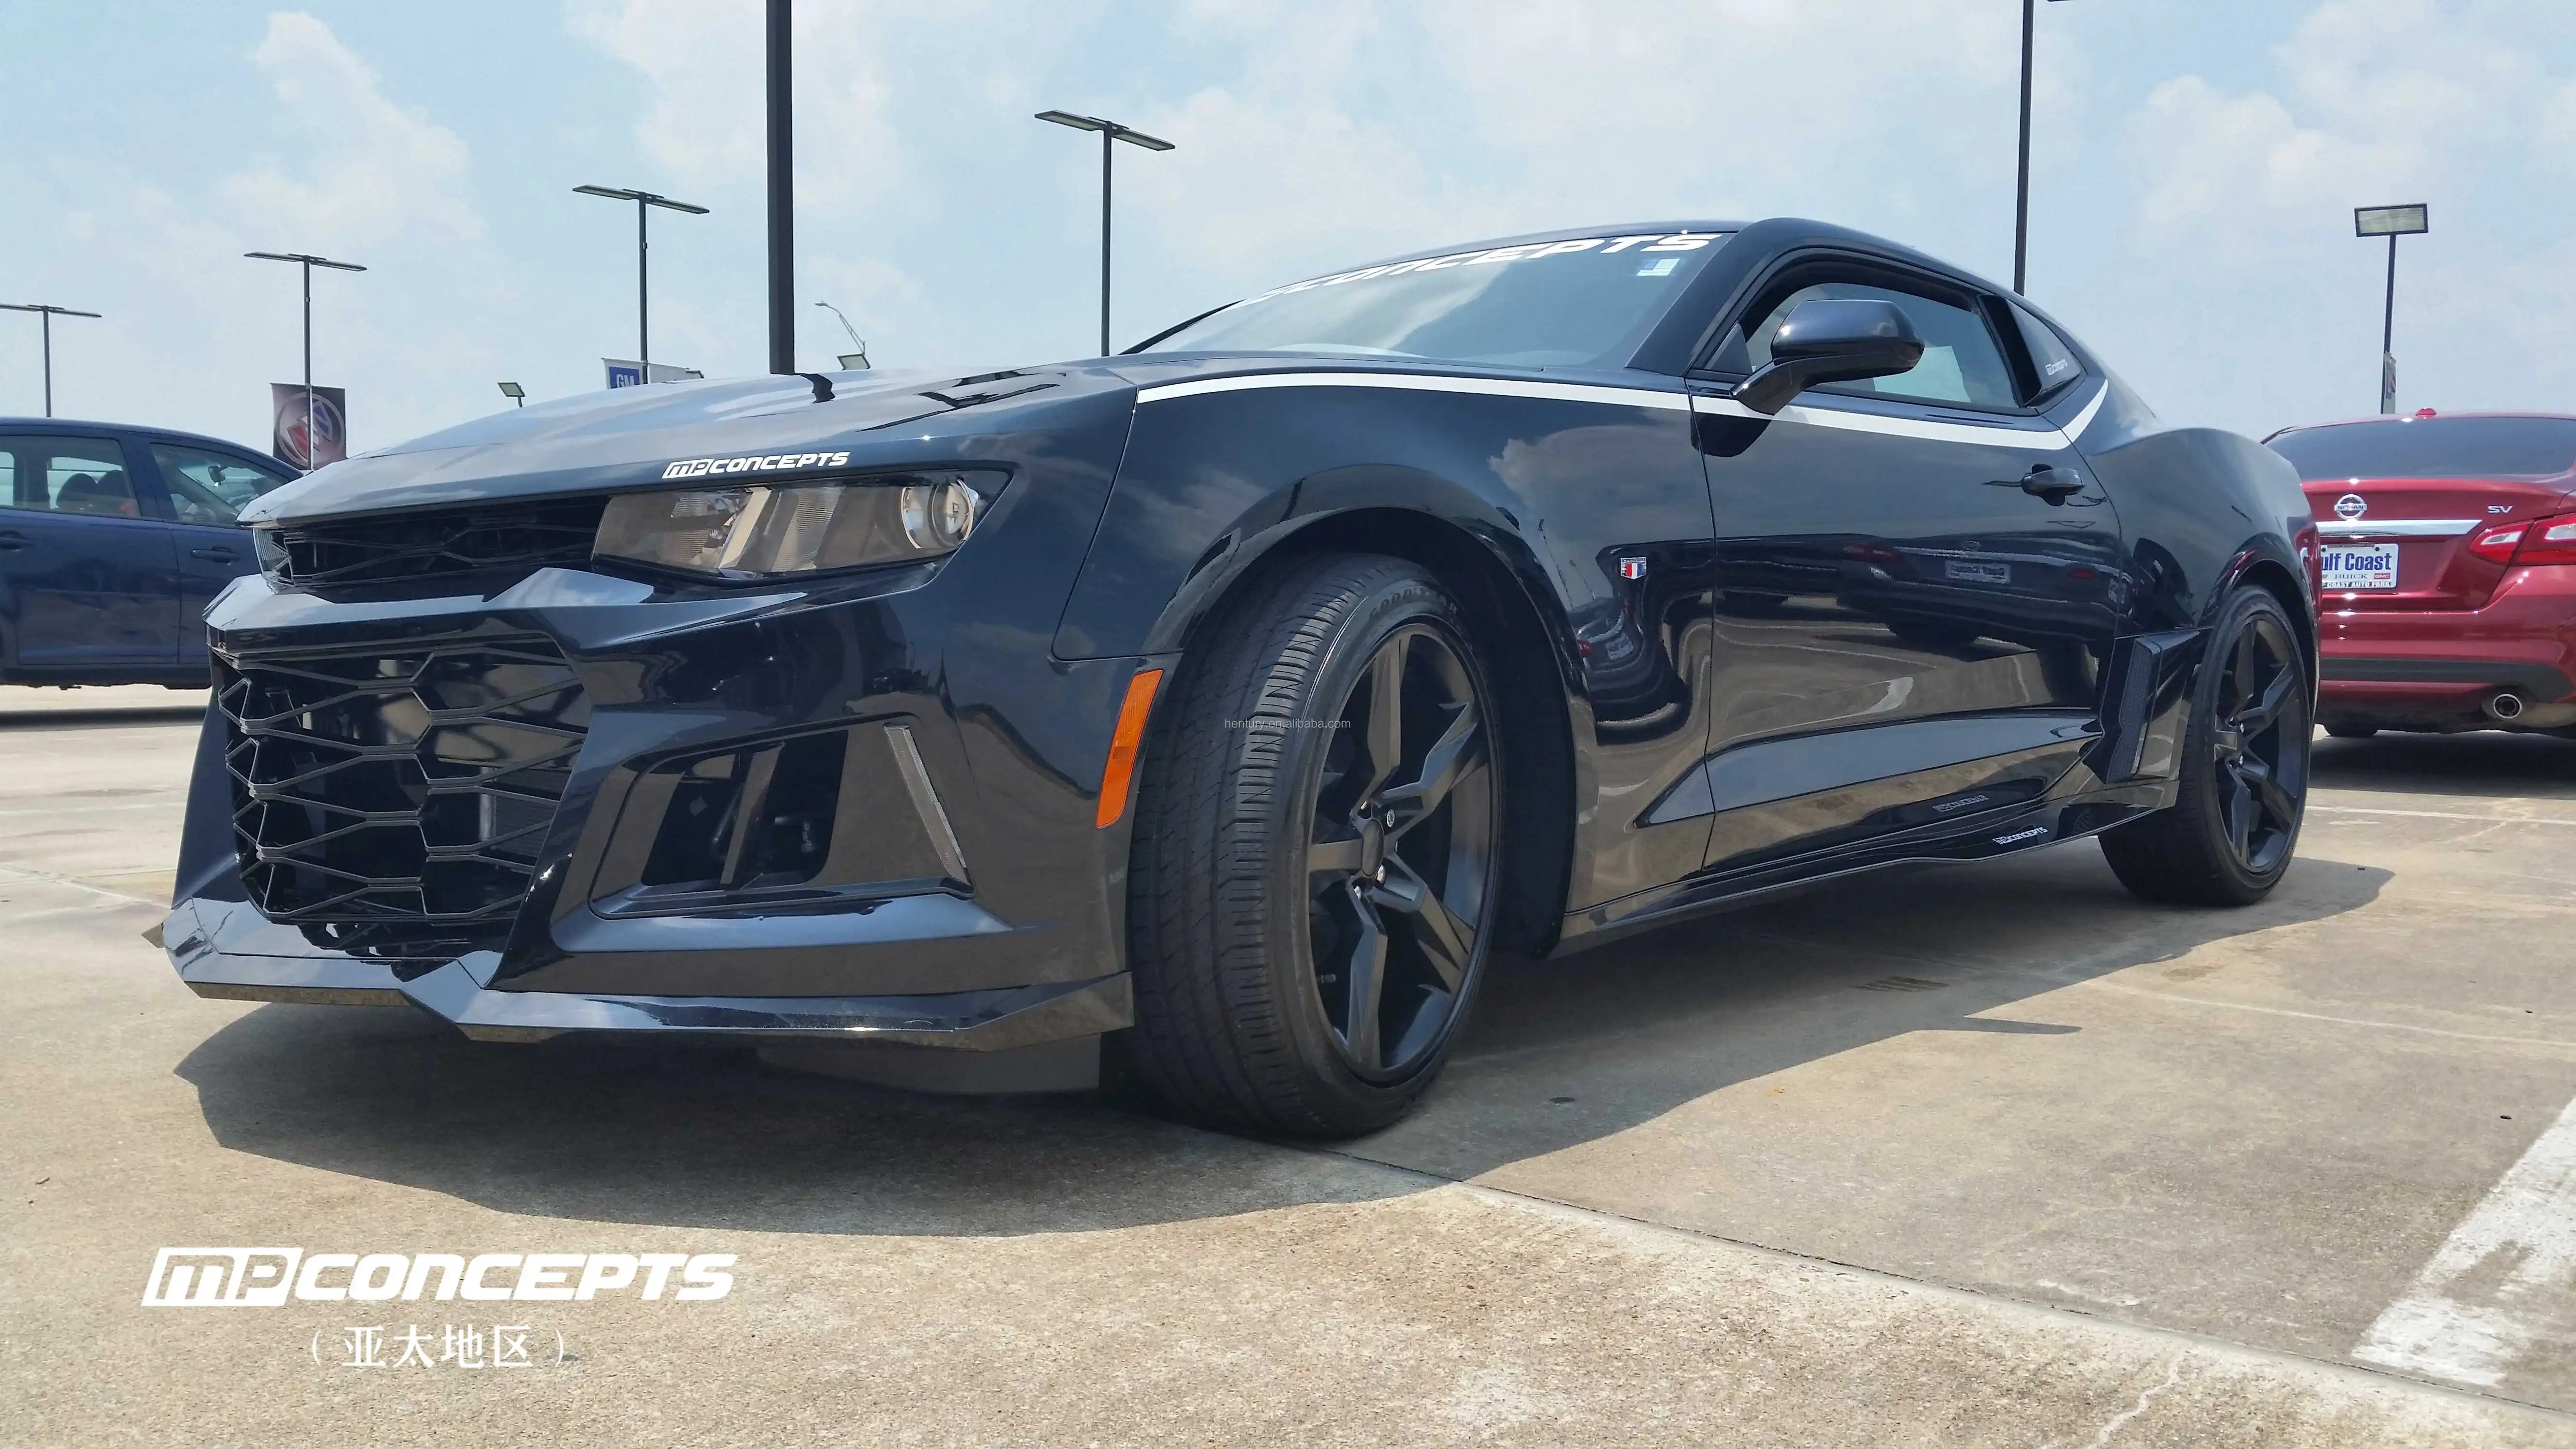 Mp Concepts Side Skirt For Camaro 2016-2022 - Buy Side Rockers For Camaro  2016 2017 2018 2019 2020 2021 2022,New Design Side Skirts/rockers For Camaro  2016 2017 2018 2019 2020 2021 2022,Mp Concepts 2015 2016 2017 2018 2019  2020 2021 2022 Product on ...